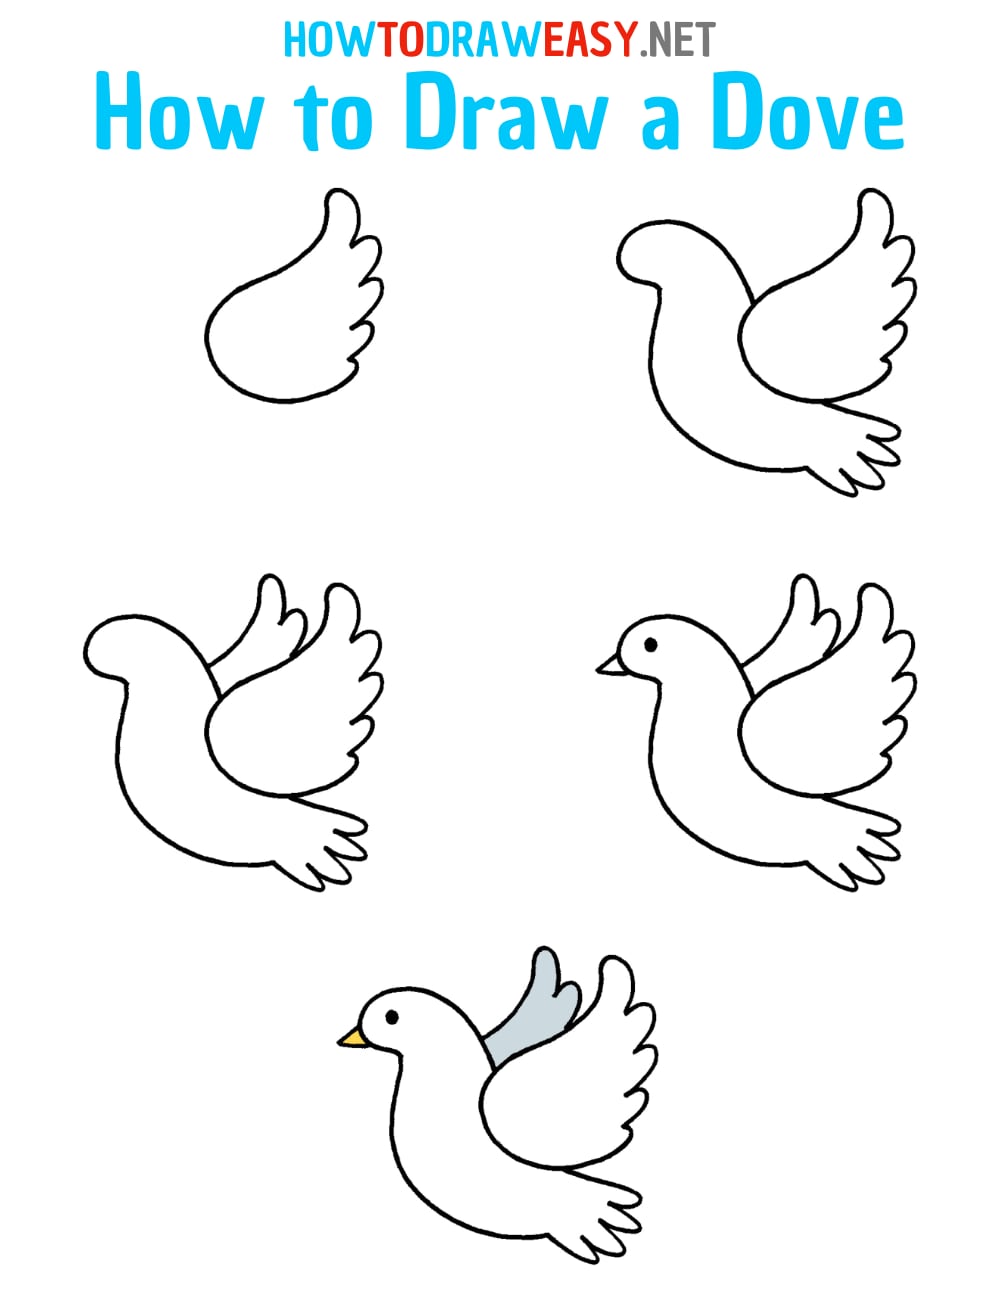 How to Draw a Dove Step by Step